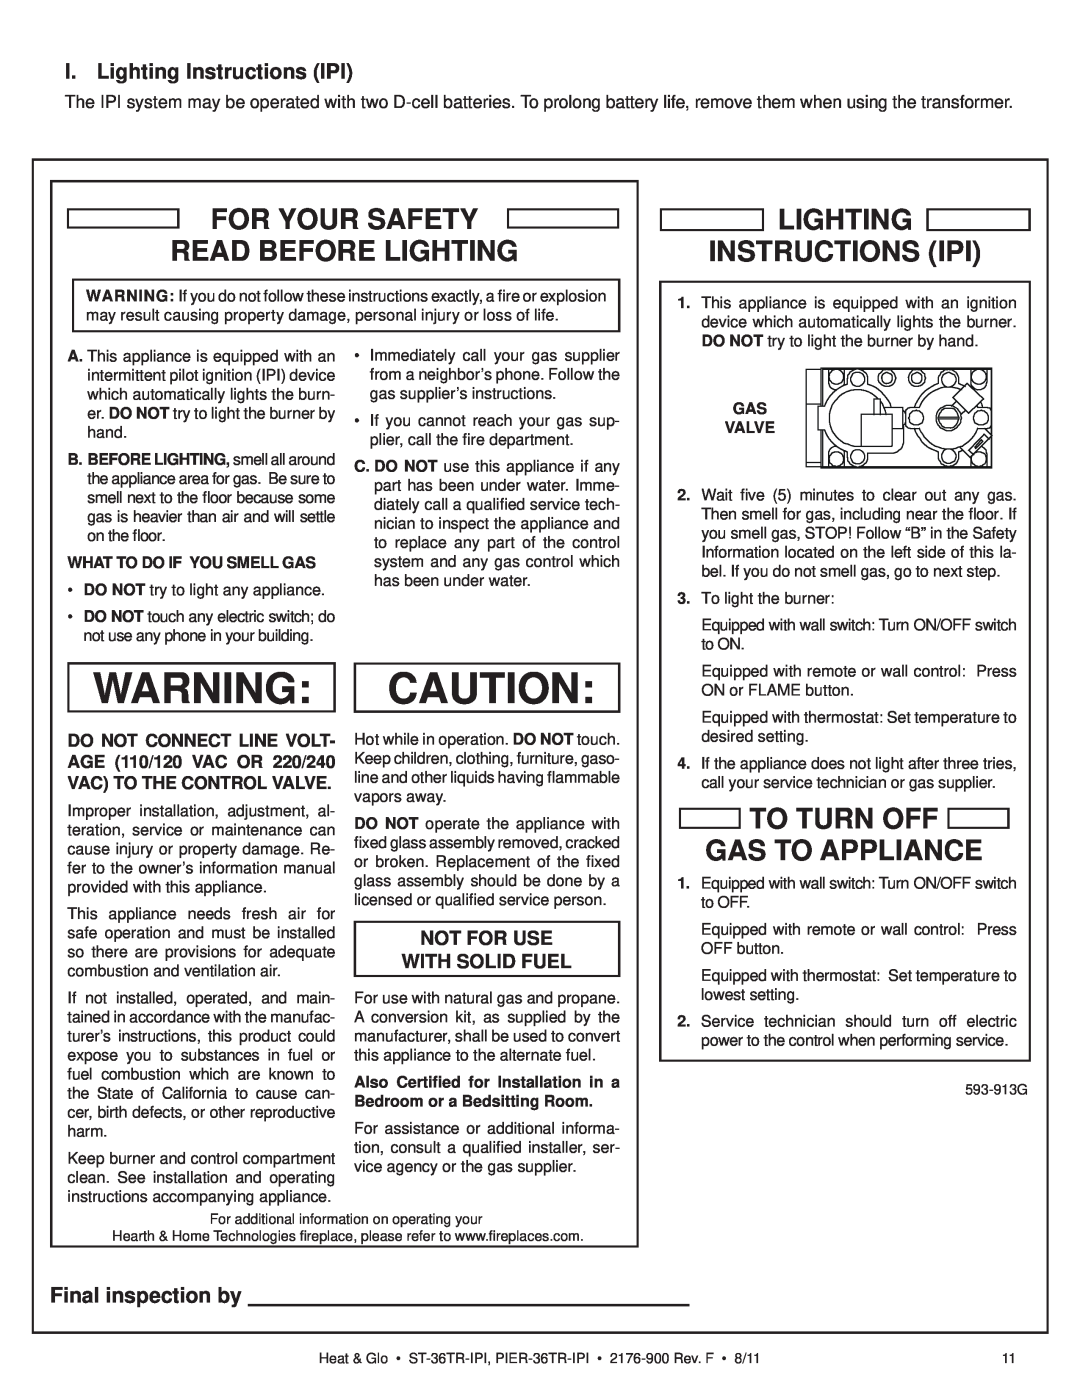 Heat & Glo LifeStyle ST-36TR-IPI For Your Safety Read Before Lighting, Lighting Instructions Ipi, Final inspection by 